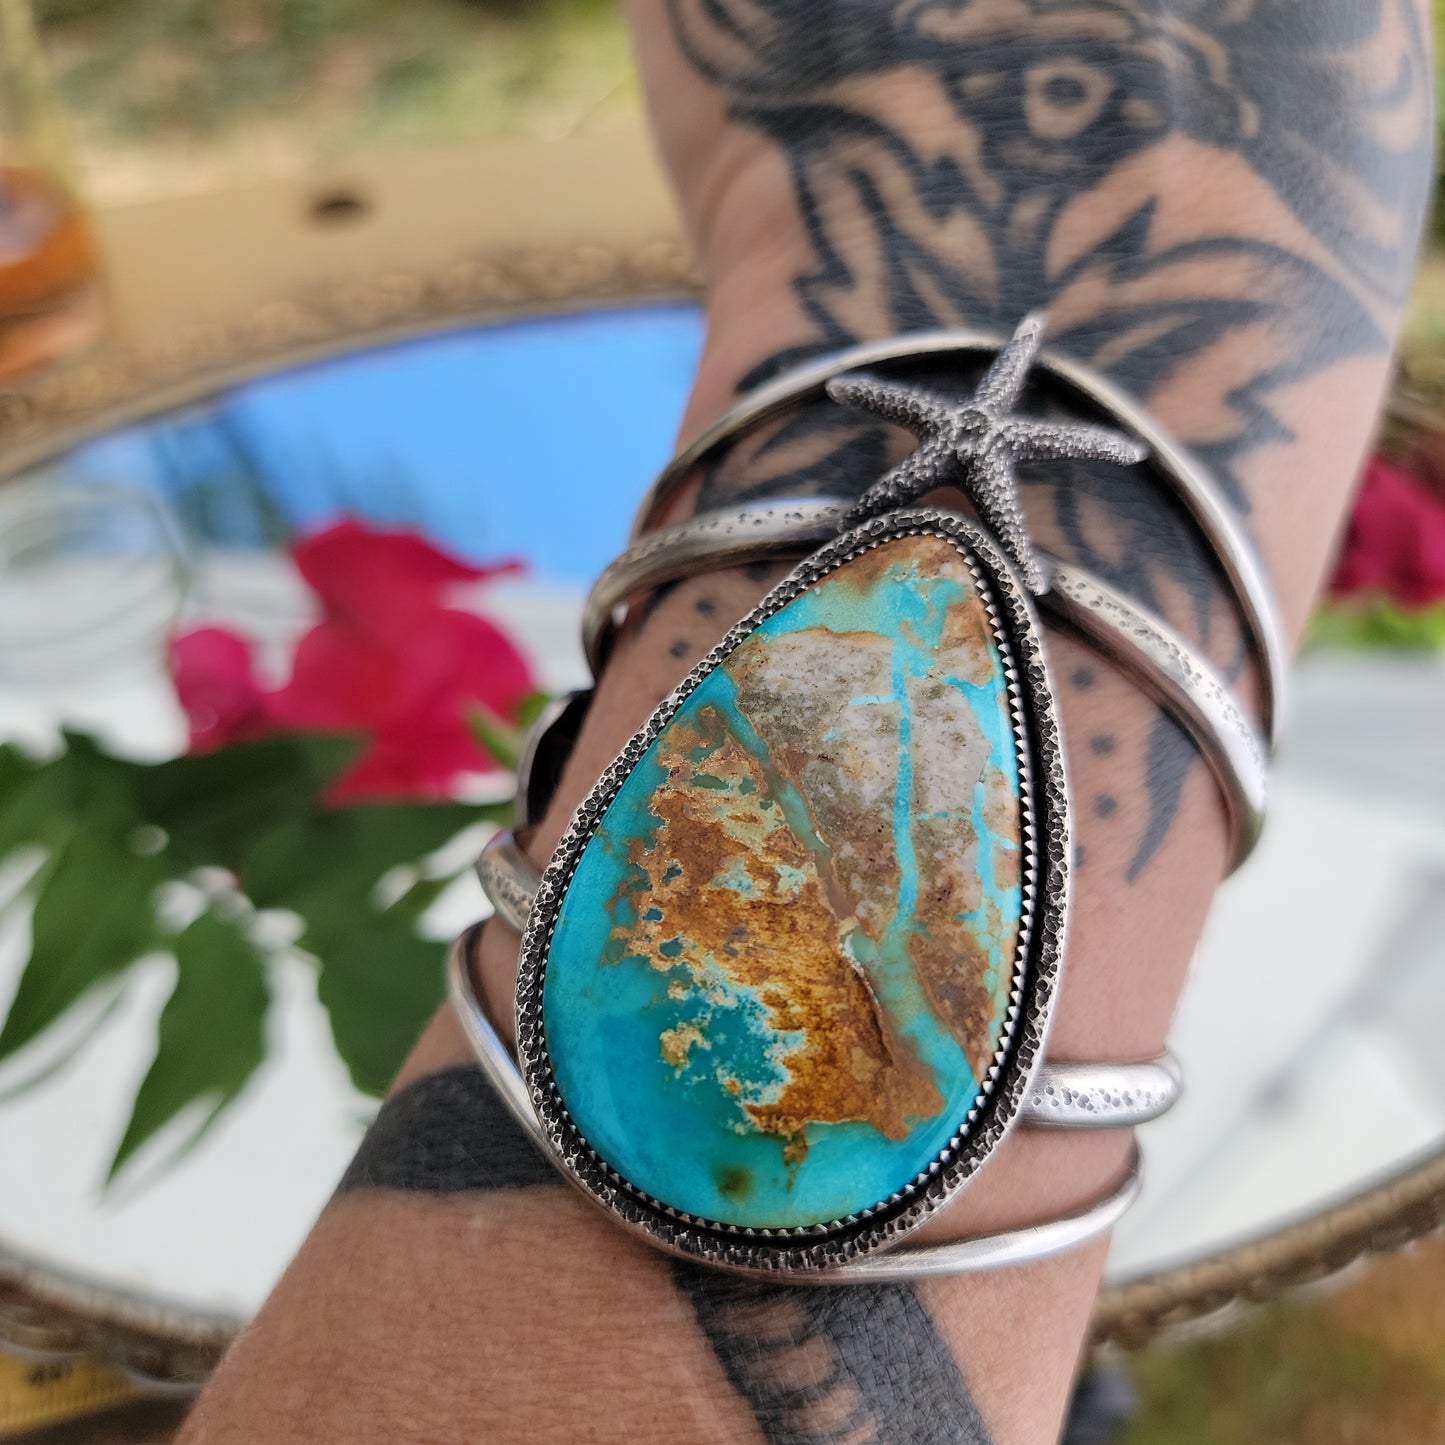 XX//AEGEAN Cuff Bracelet - Stone Mountain Turquoise in All Sterling Silver size M